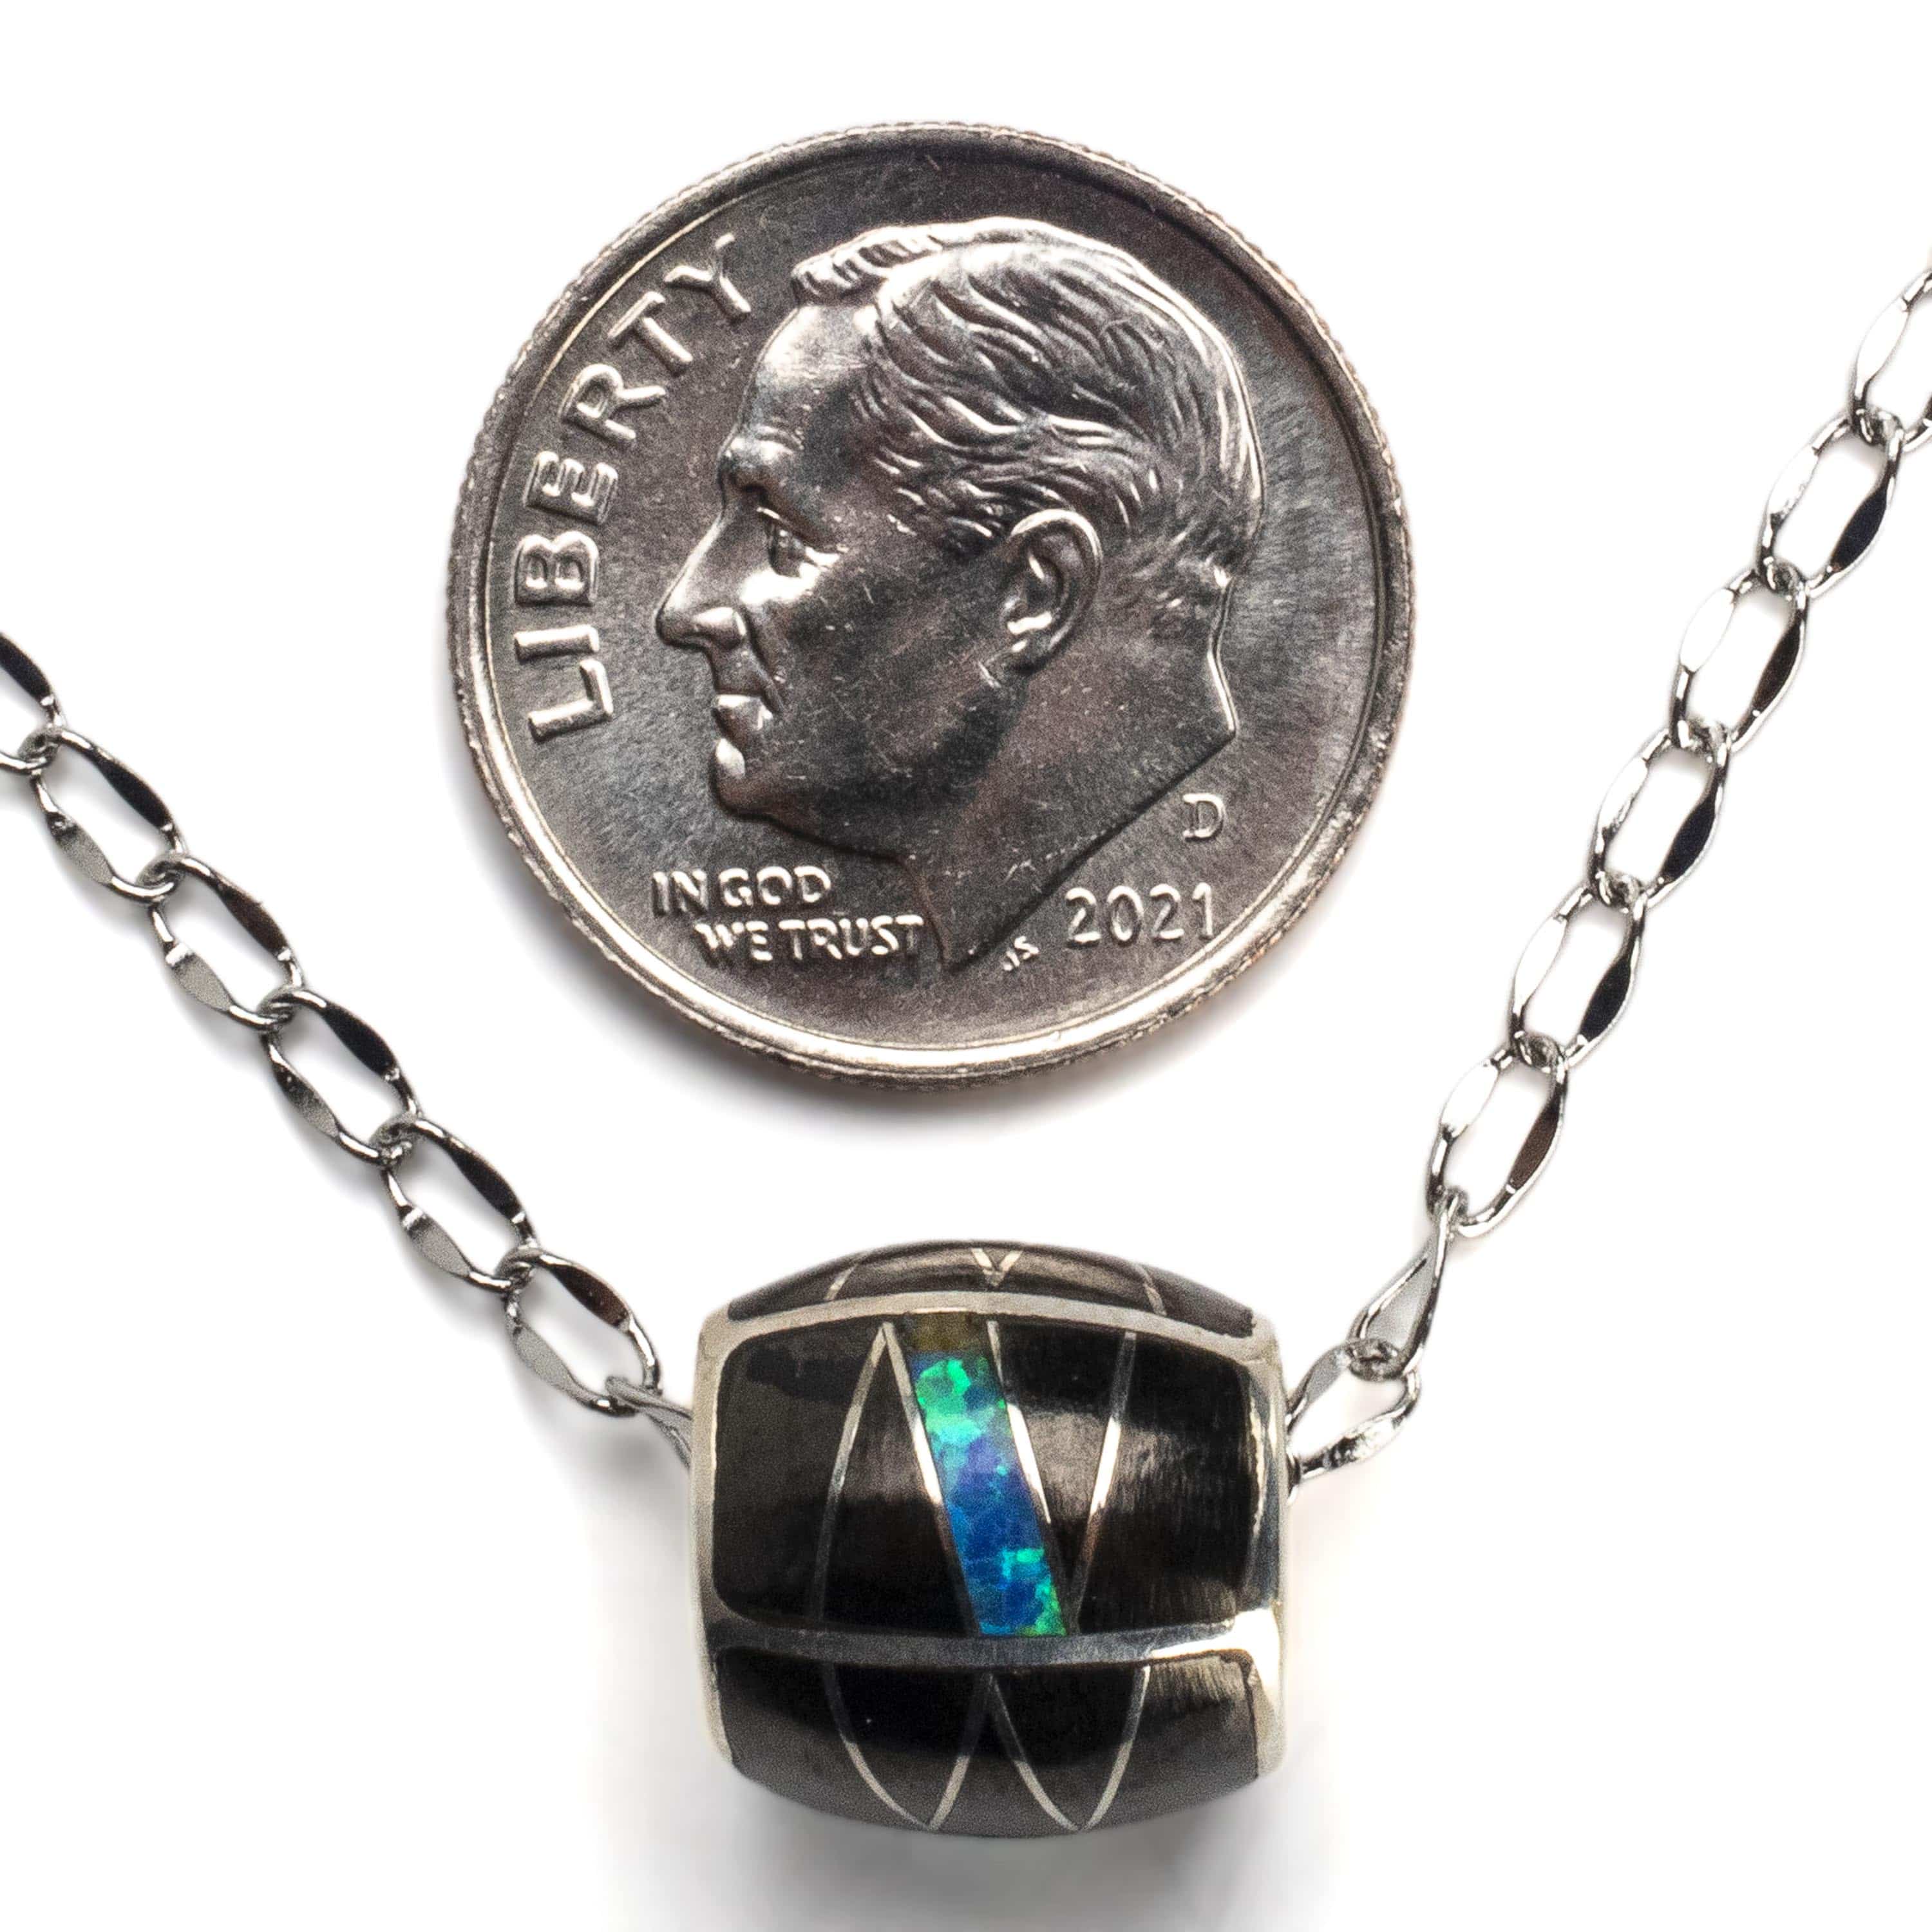 Kalifano Southwest Silver Jewelry Black Onyx Pendant Handmade with Sterling Silver and Aqua Opal Accent NMN.0570.BO